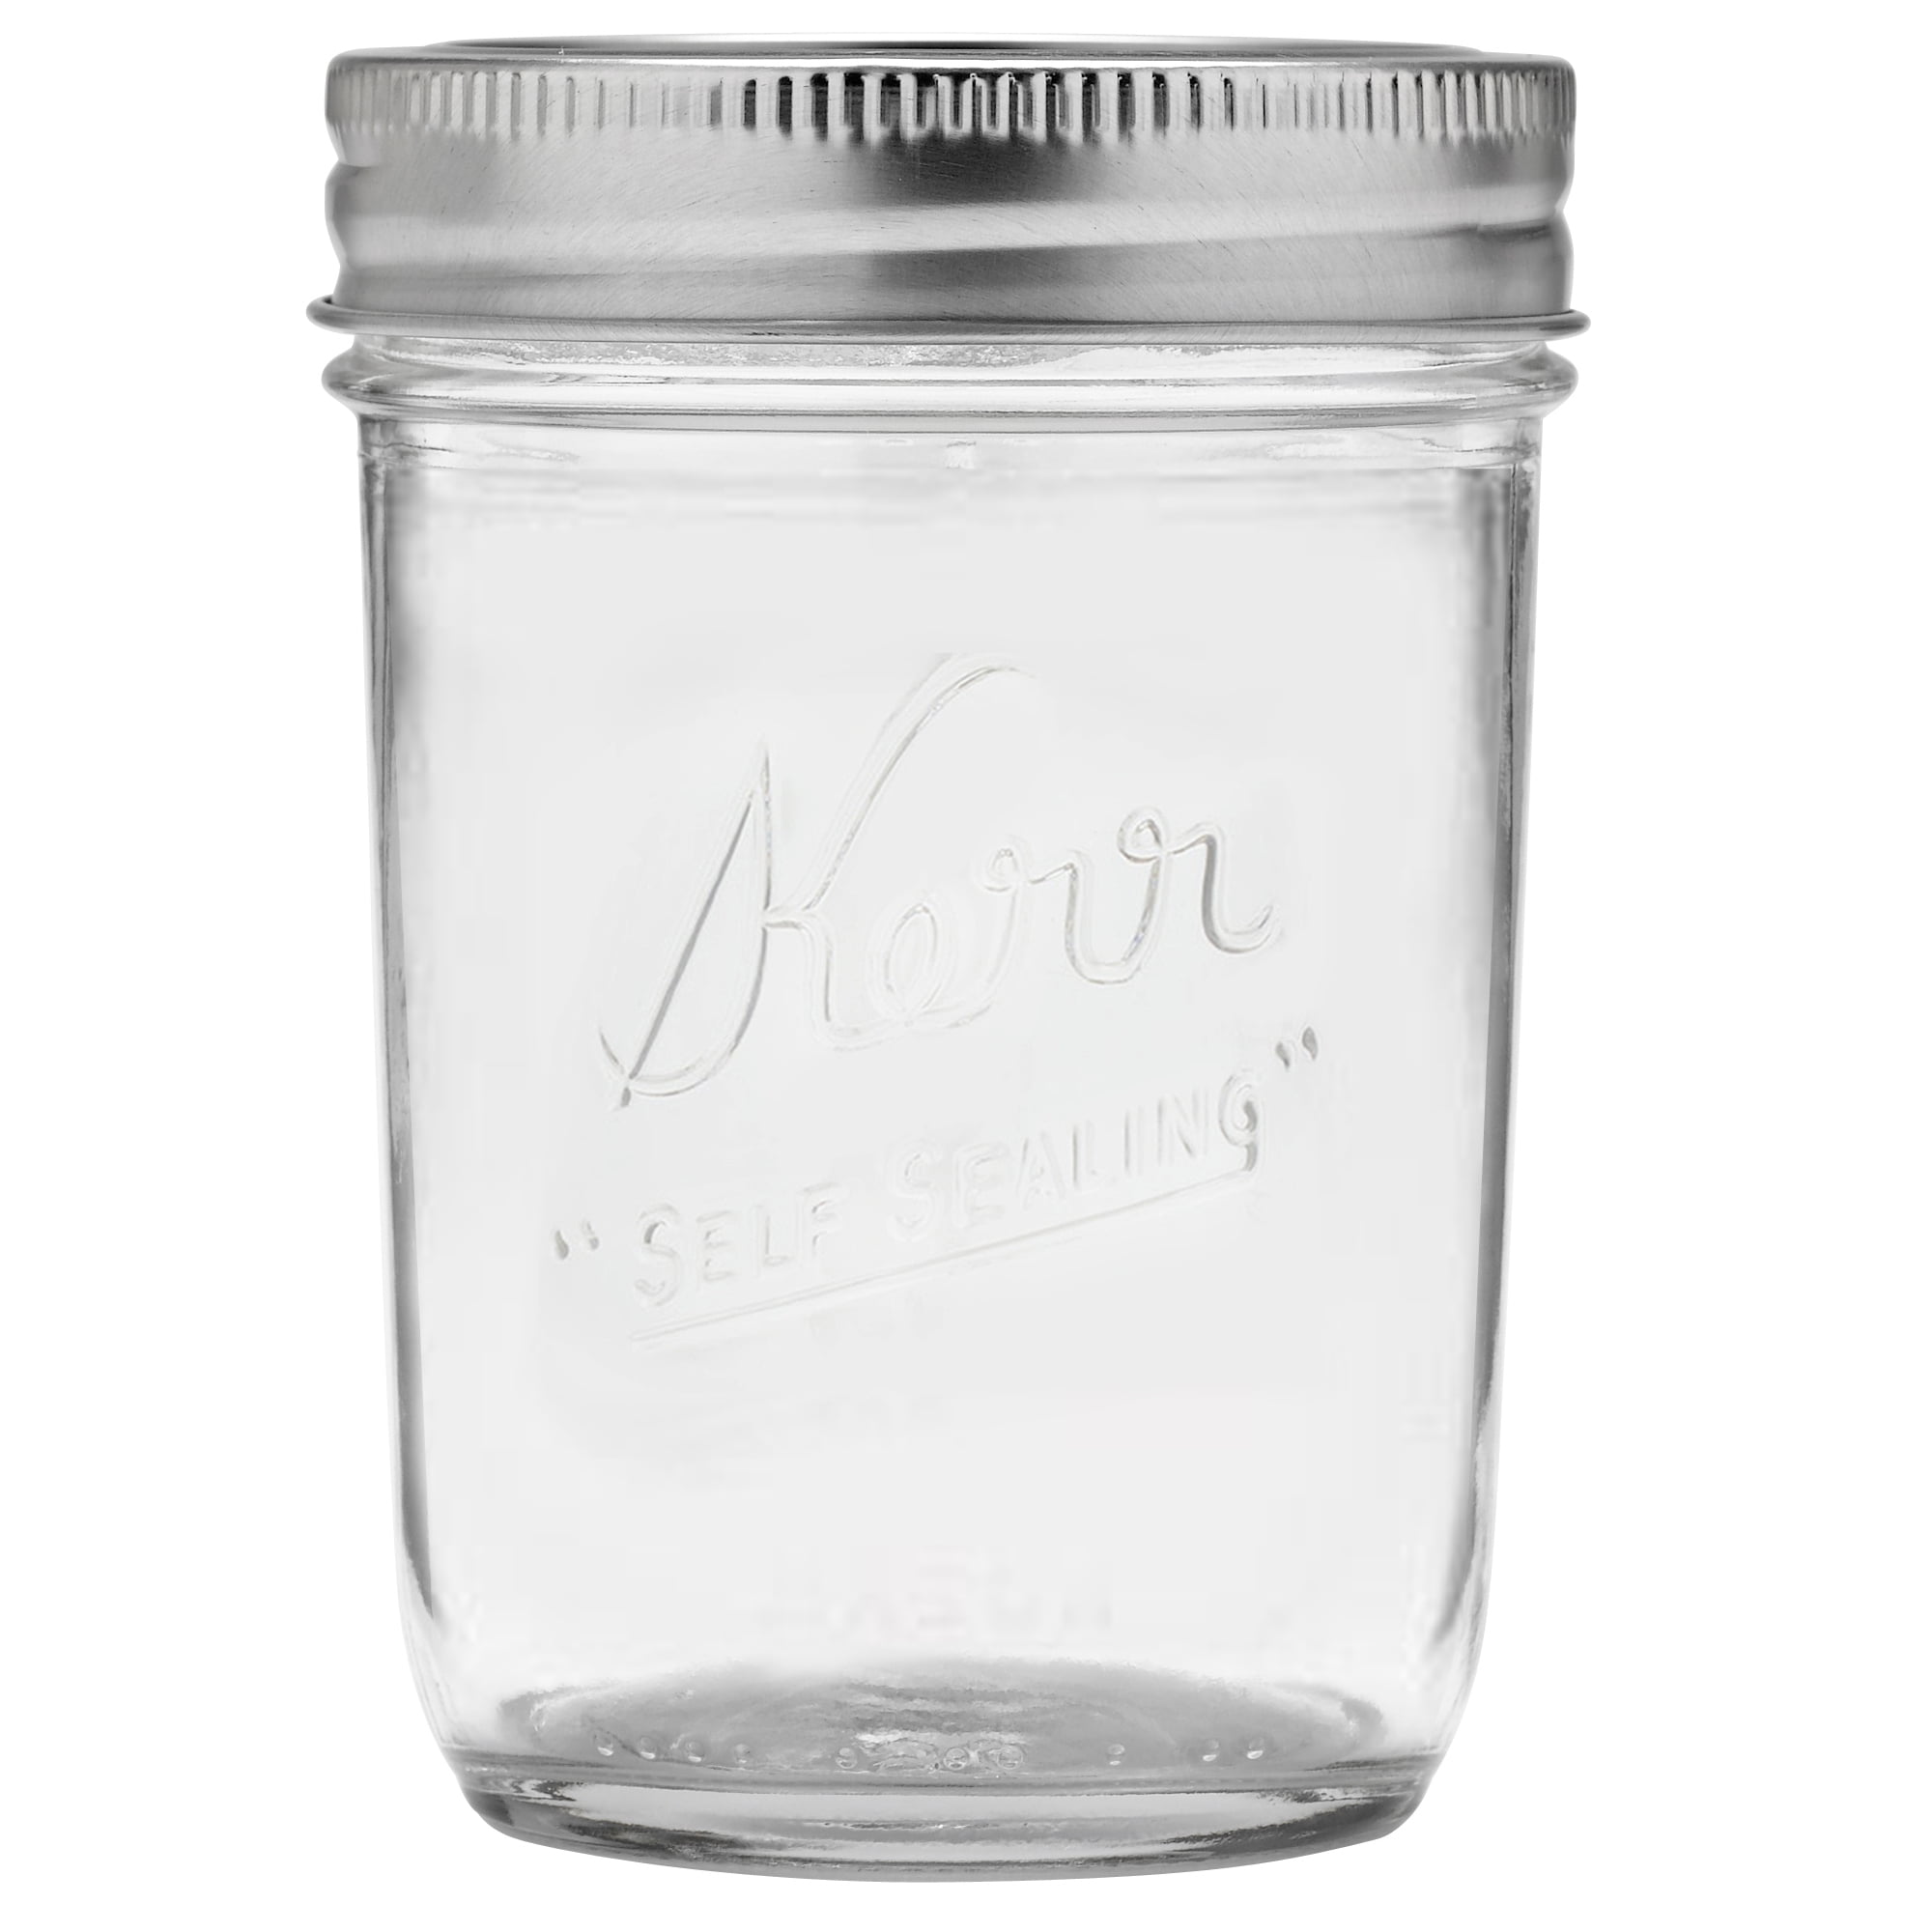 Kerr Glass Mason Jar Lid Band Wide Mouth 8 Ounces 12 Count Canning Container 